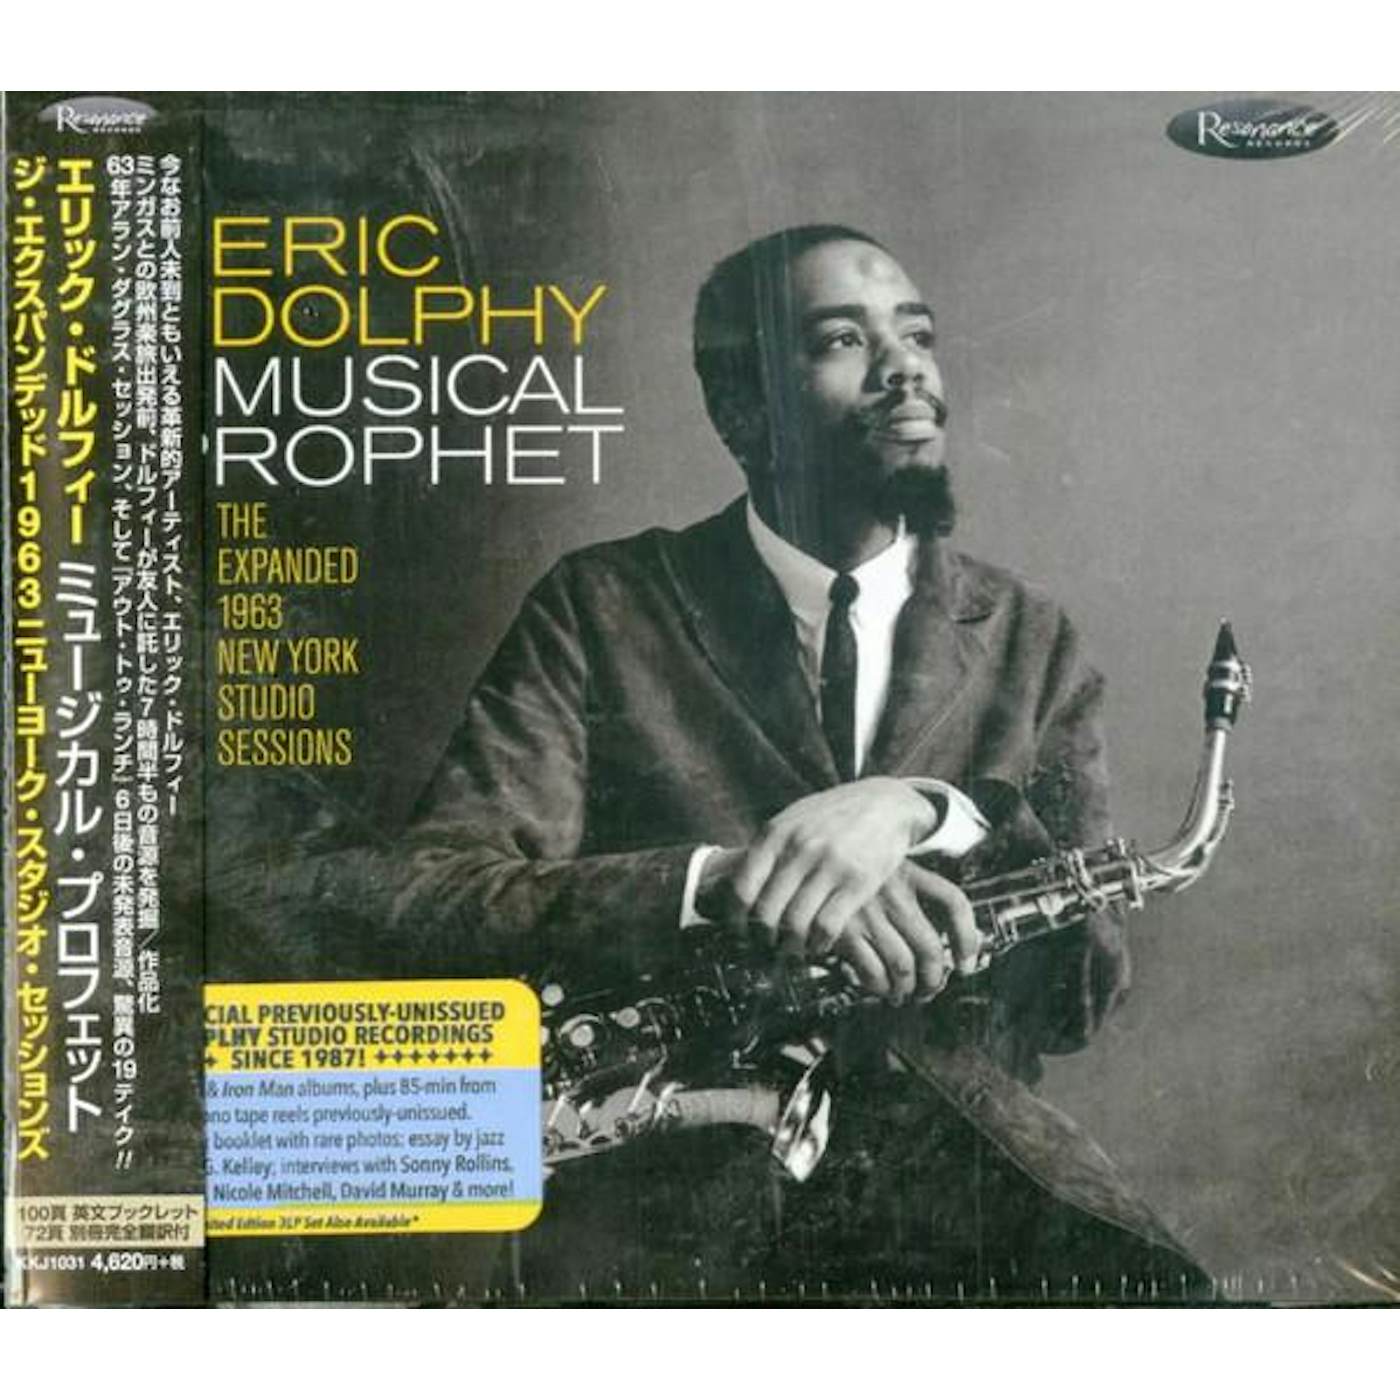 Eric Dolphy MUSICAL PROPHET THE EXPANDED 1W YORK STUDIO SESSIONS CD